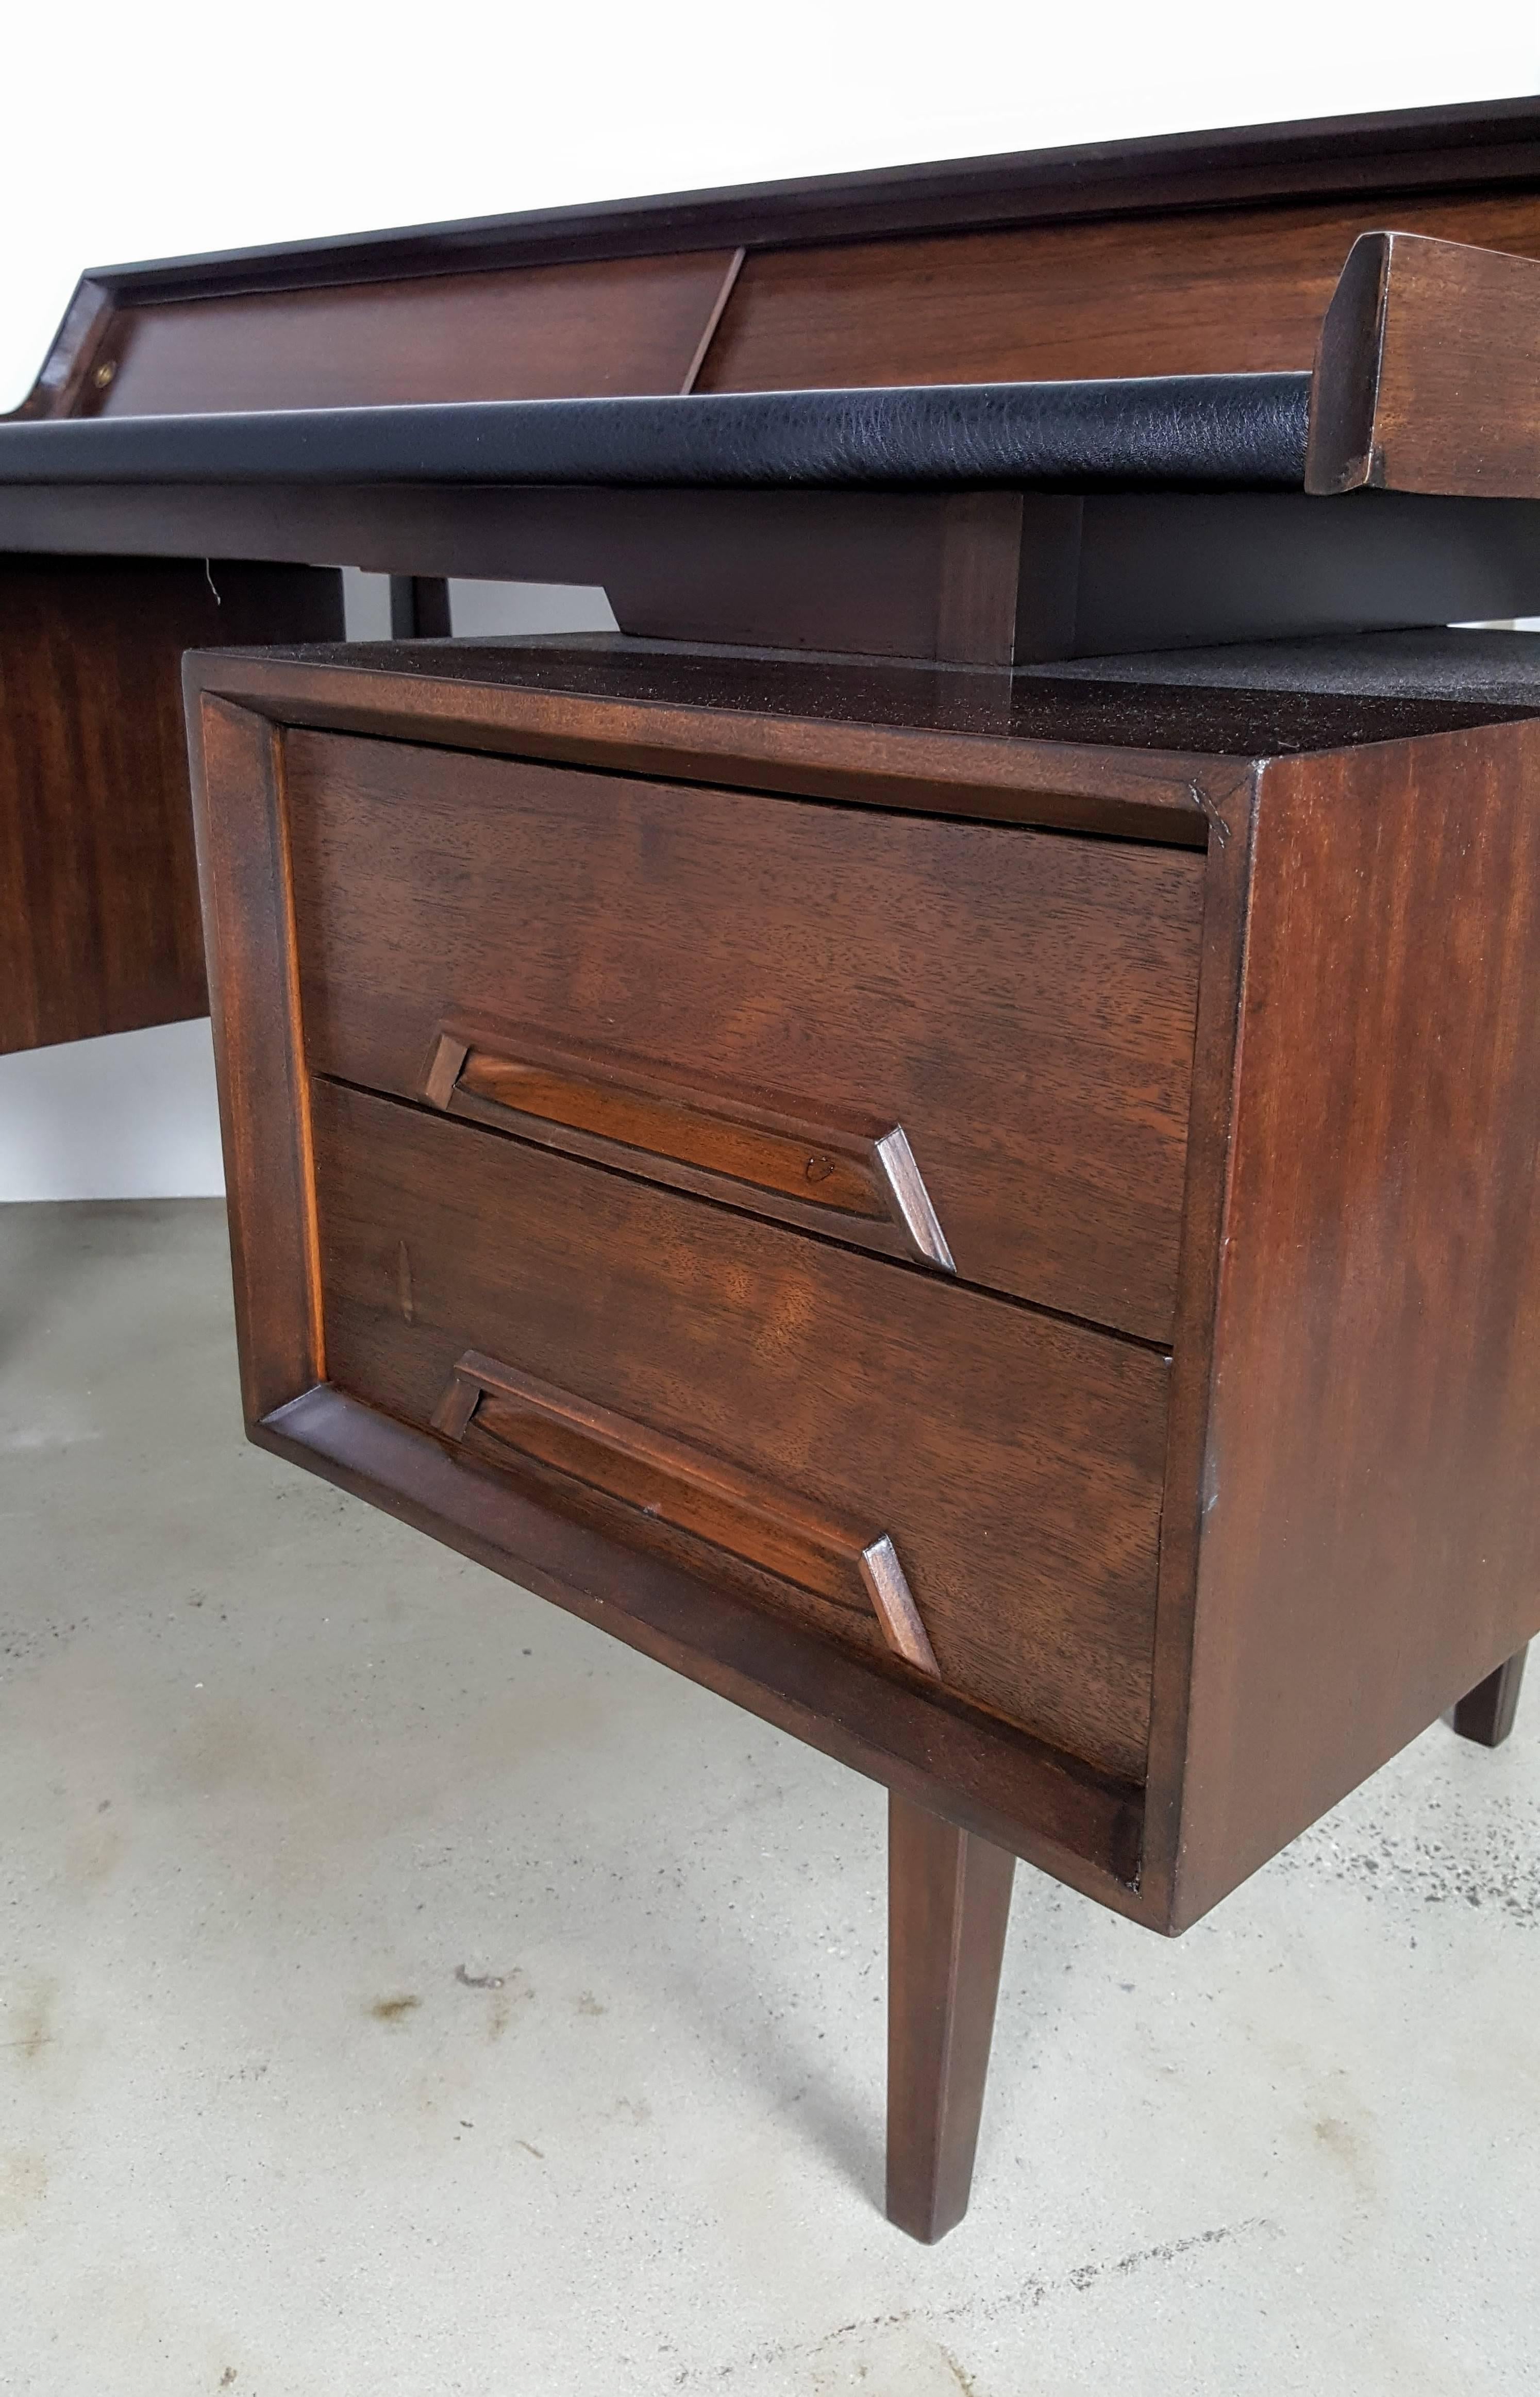 American Architectural Mahogany Writing Desk by Milo Baughman, 1960s